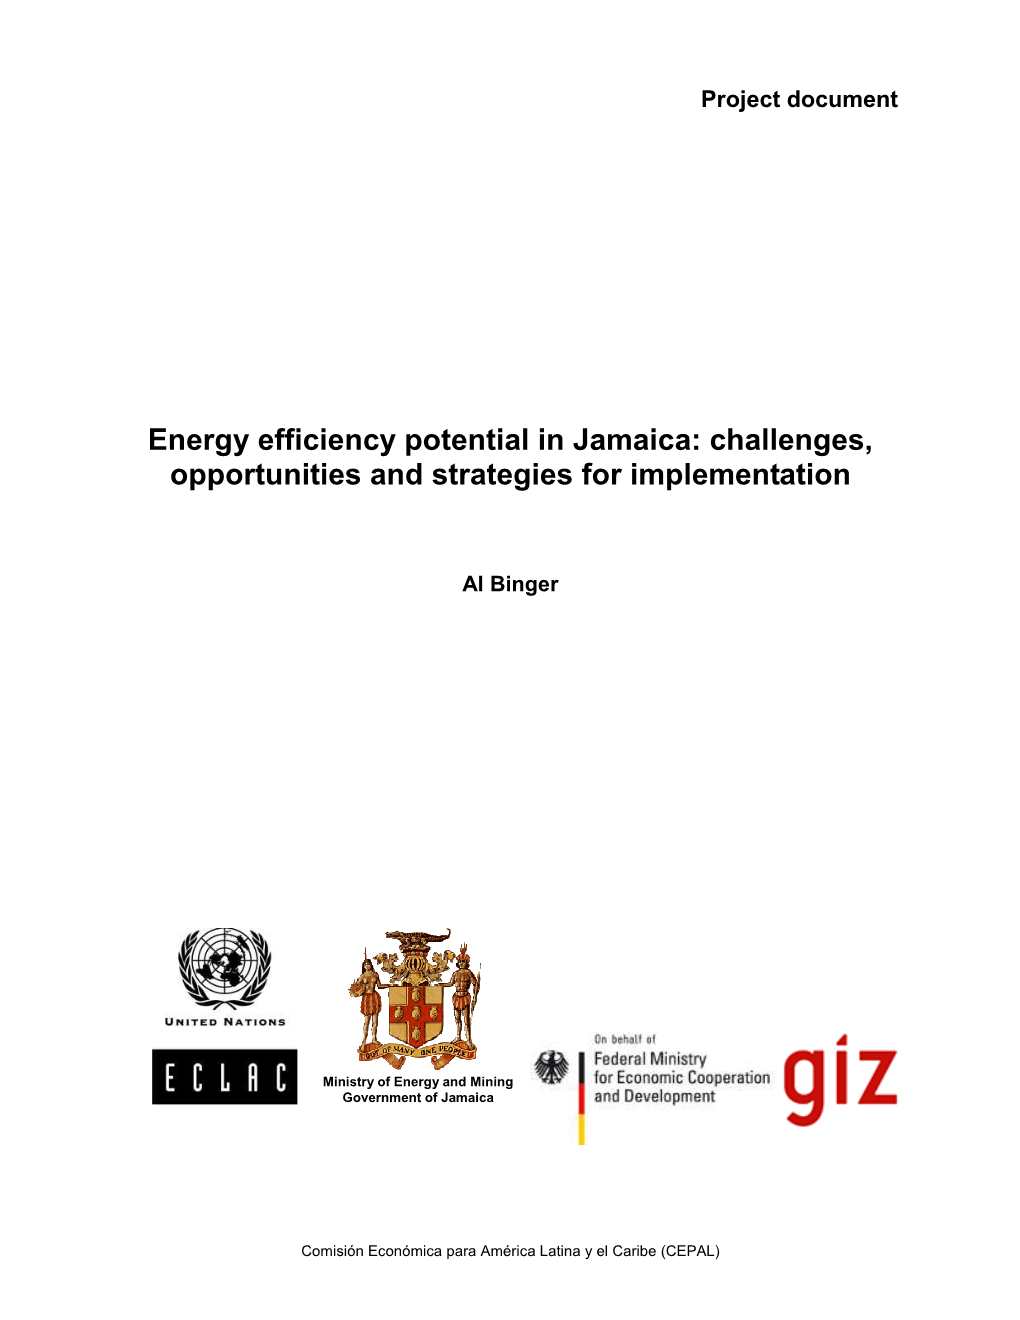 Energy Efficiency Potential in Jamaica: Challenges, Opportunities and Strategies for Implementation